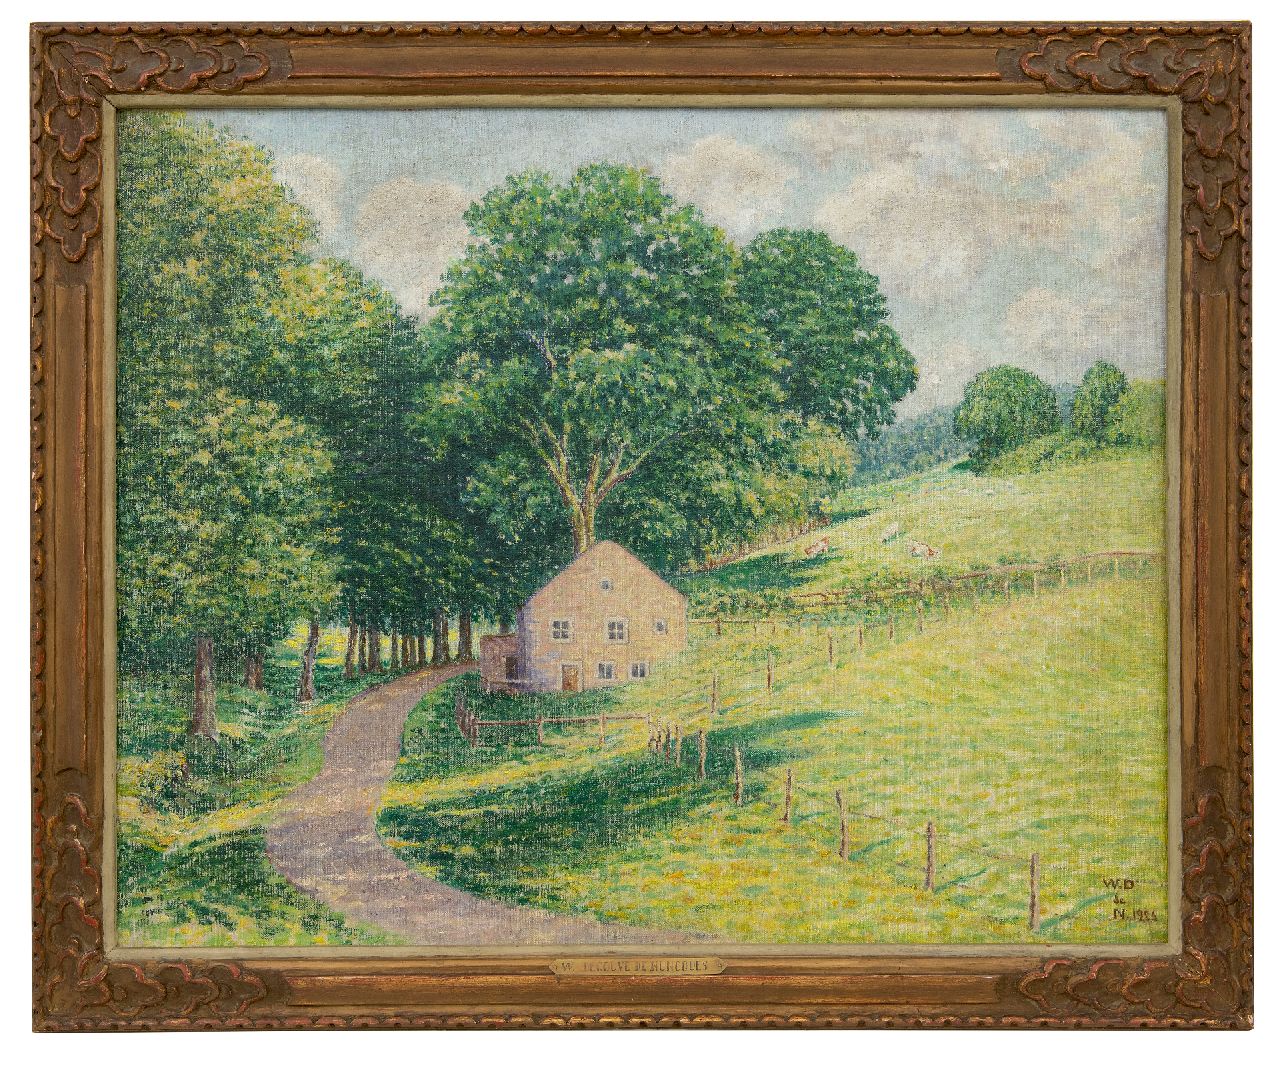 Degouve de Nuncques W.  | William Degouve de Nuncques | Paintings offered for sale | Landscape with farm in the Ardennes, oil on canvas 63.9 x 80.8 cm, signed l.r. with monogram and dated 1926